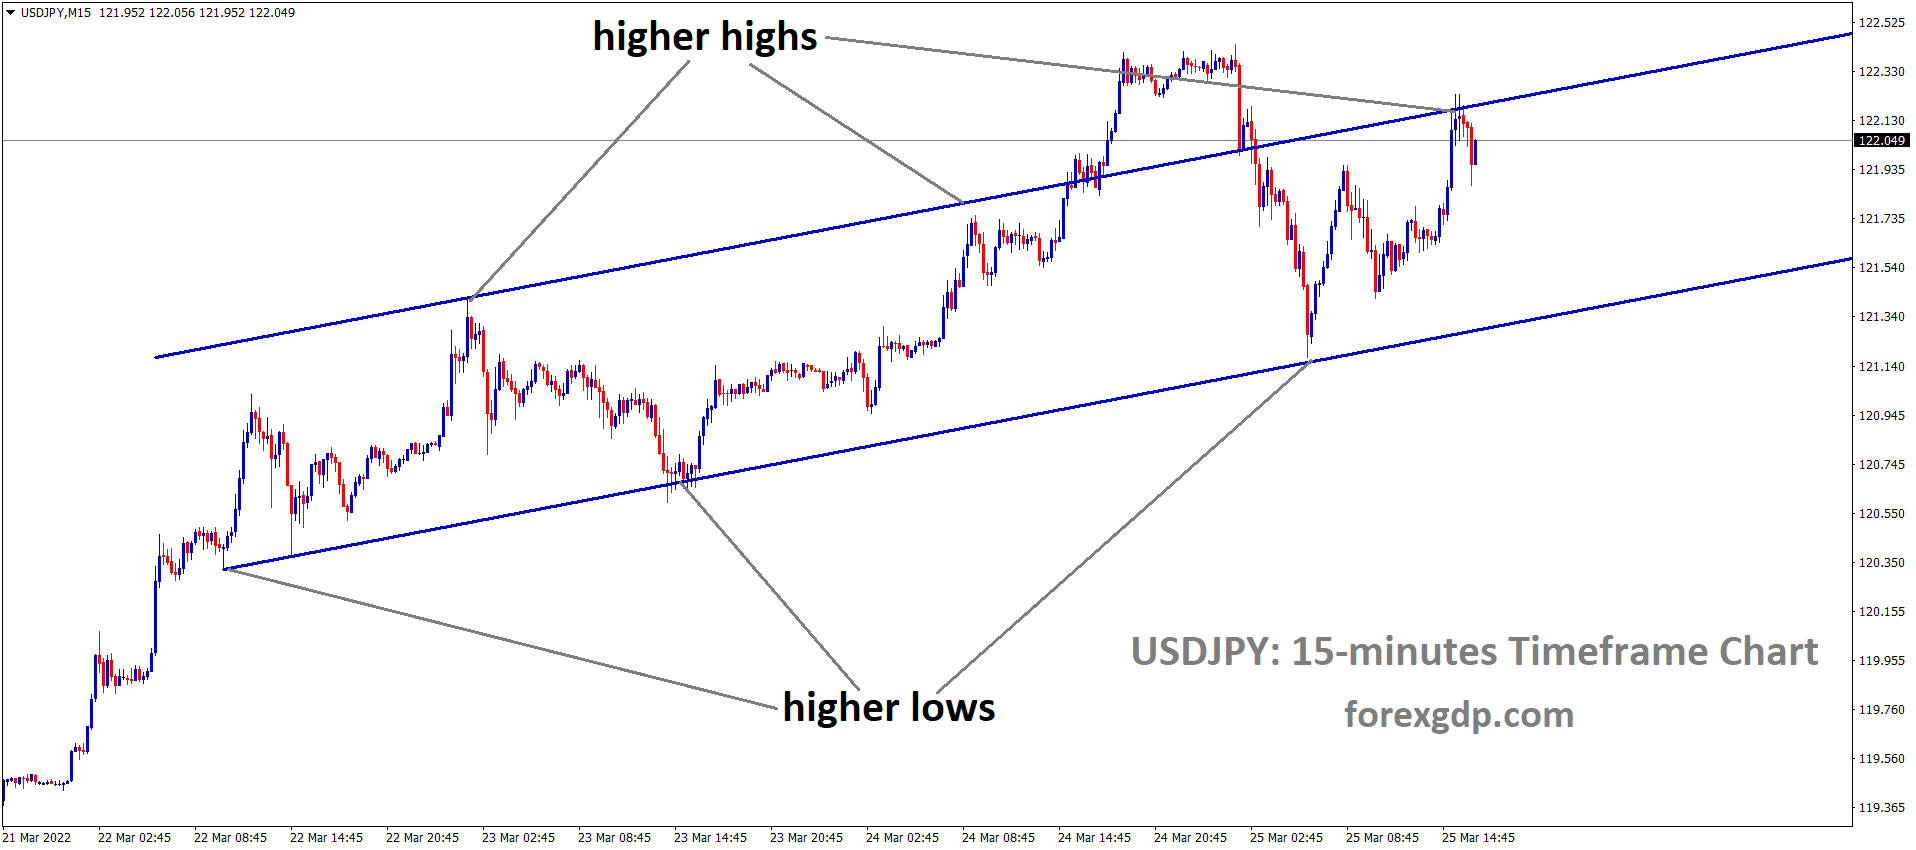 USDJPY M15 Market has fallen from the higher high area of the Ascending channel